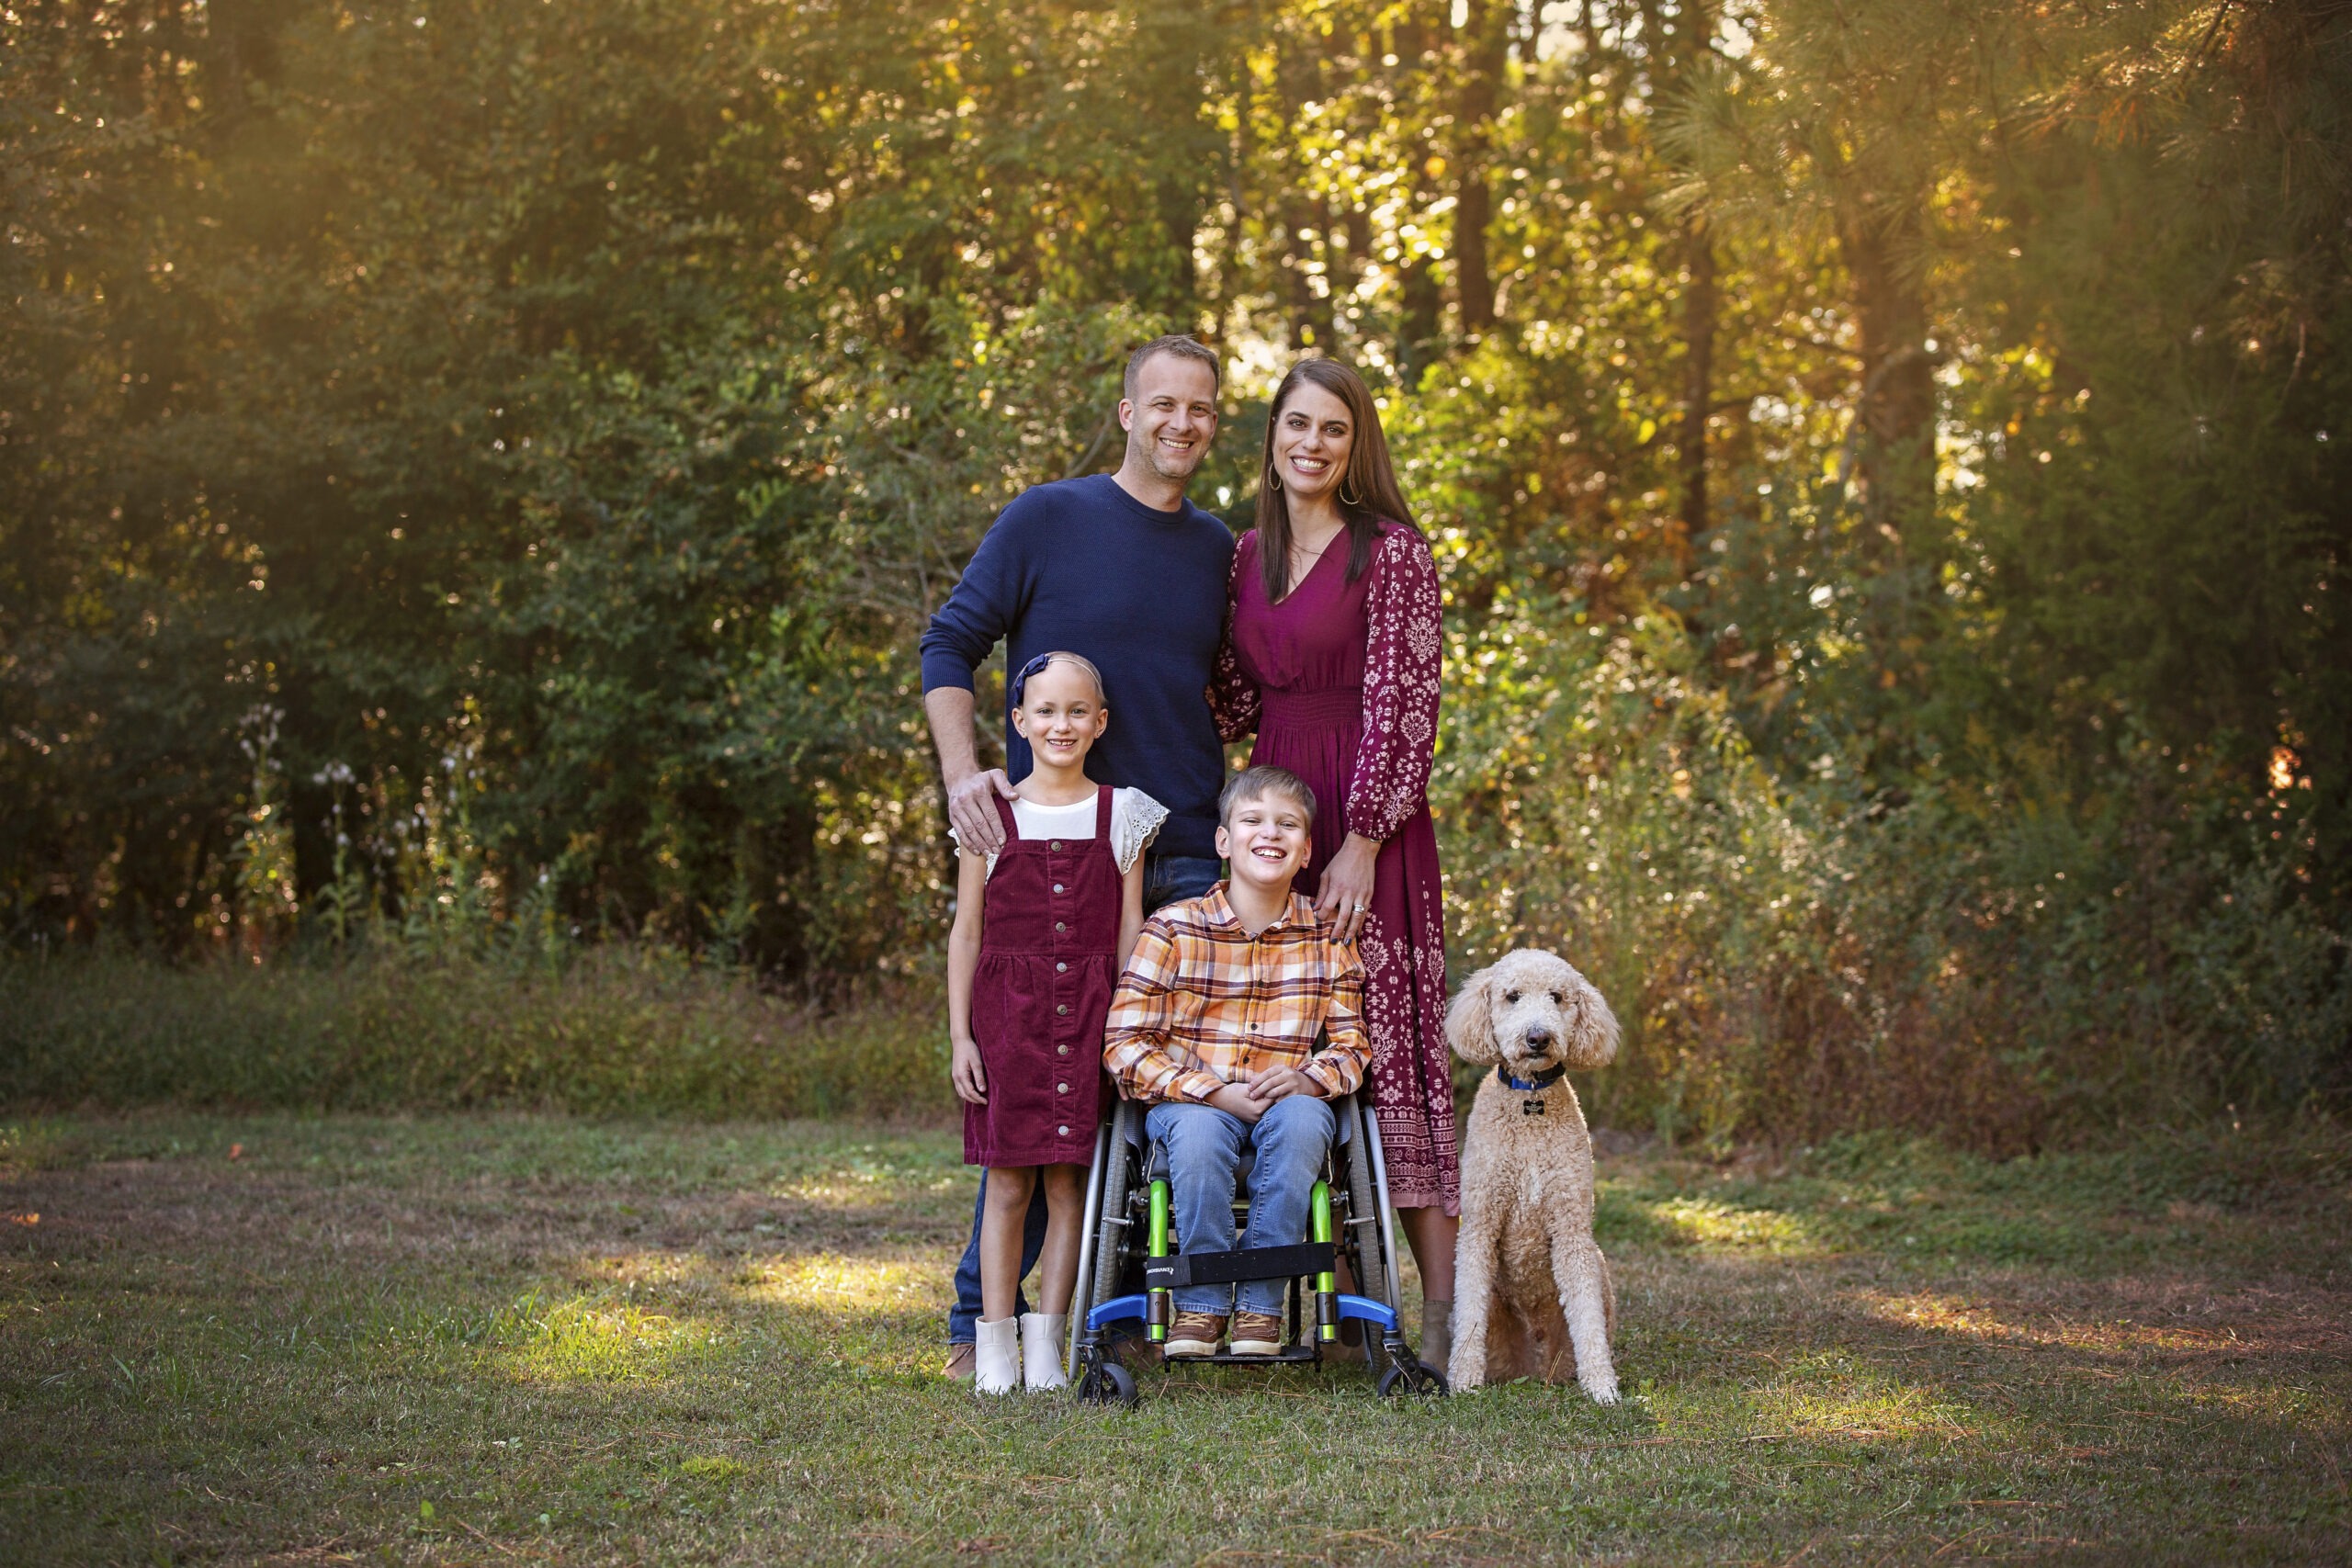 A group family photo of Karen, Chad, Claire, and Eli along with their dog. They are standing in front of a forest, surrounded by greenery.